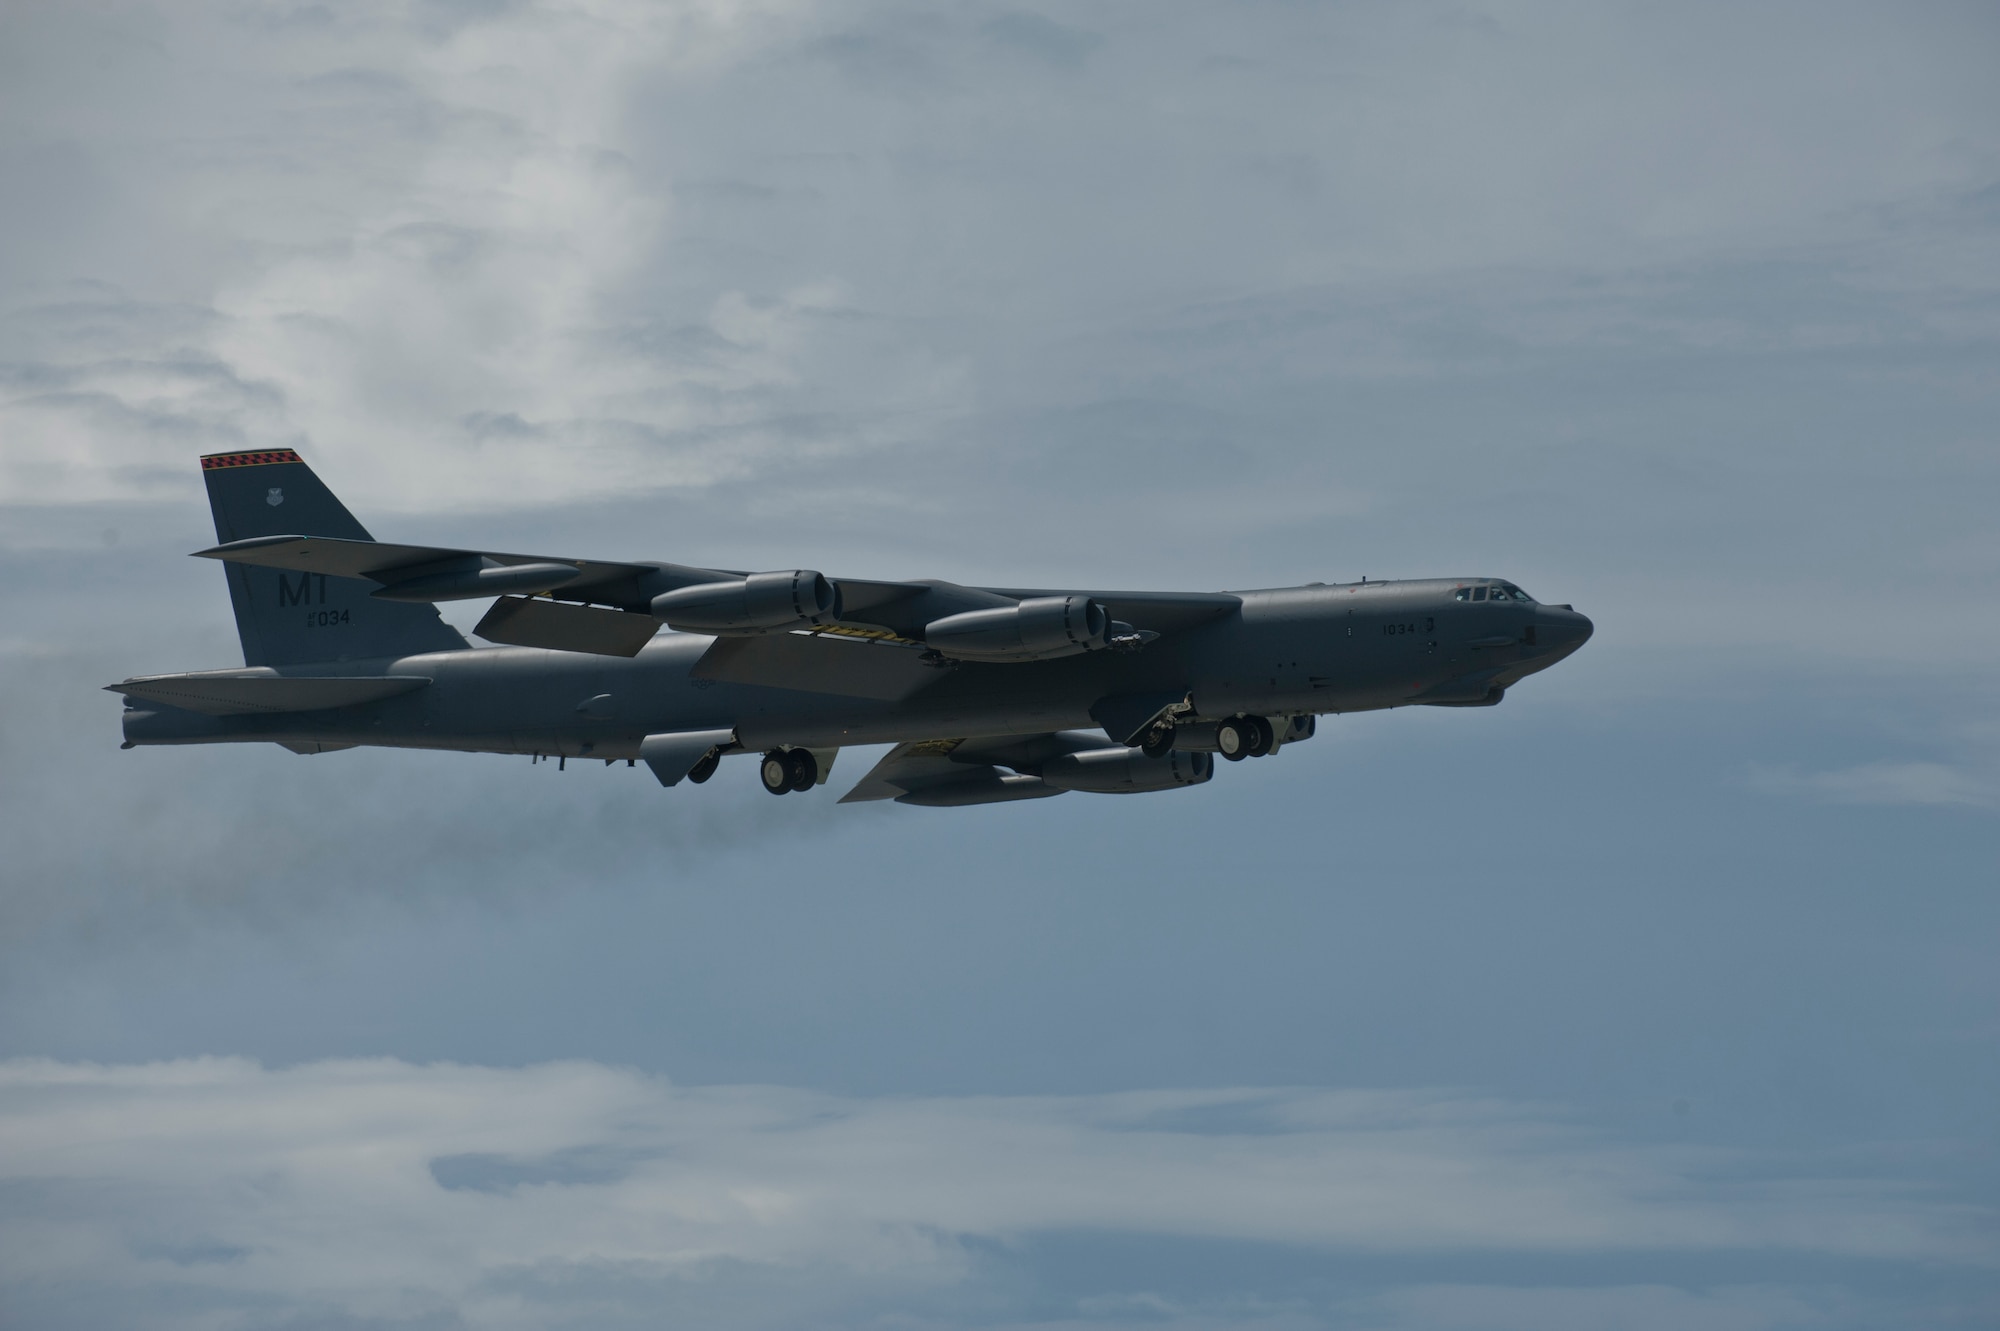 ANDERSEN AIR FORCE BASE, Guam-Members of the 69th Expeditionary Bomber Squadron, deployed in from Minot Air Force Base, North Dakota, perform pre-flight checks on a B-52 Stratofortress aircraft to participate in Exercise Pitch Black here August 2. PB 12 is a multilateral exercise conducted between the U.S. Marine Corps and Australian Defense Force, Royal Thai Armed Forces, Singapore Armed Forces, New Zealand Defense Force, Malaysian Armed Forces, French Armed Forces, British Armed Forces, Indonesian National Armed Forces and a component operating under the North Atlantic Treaty Organization in order to develop greater interoperability and a seamless response to regional crises. Greater collaboration between partner militaries strengthens regional peace, stability and prosperity.  (U.S. Air Force photo by Staff Sgt. Alexandre Montes)